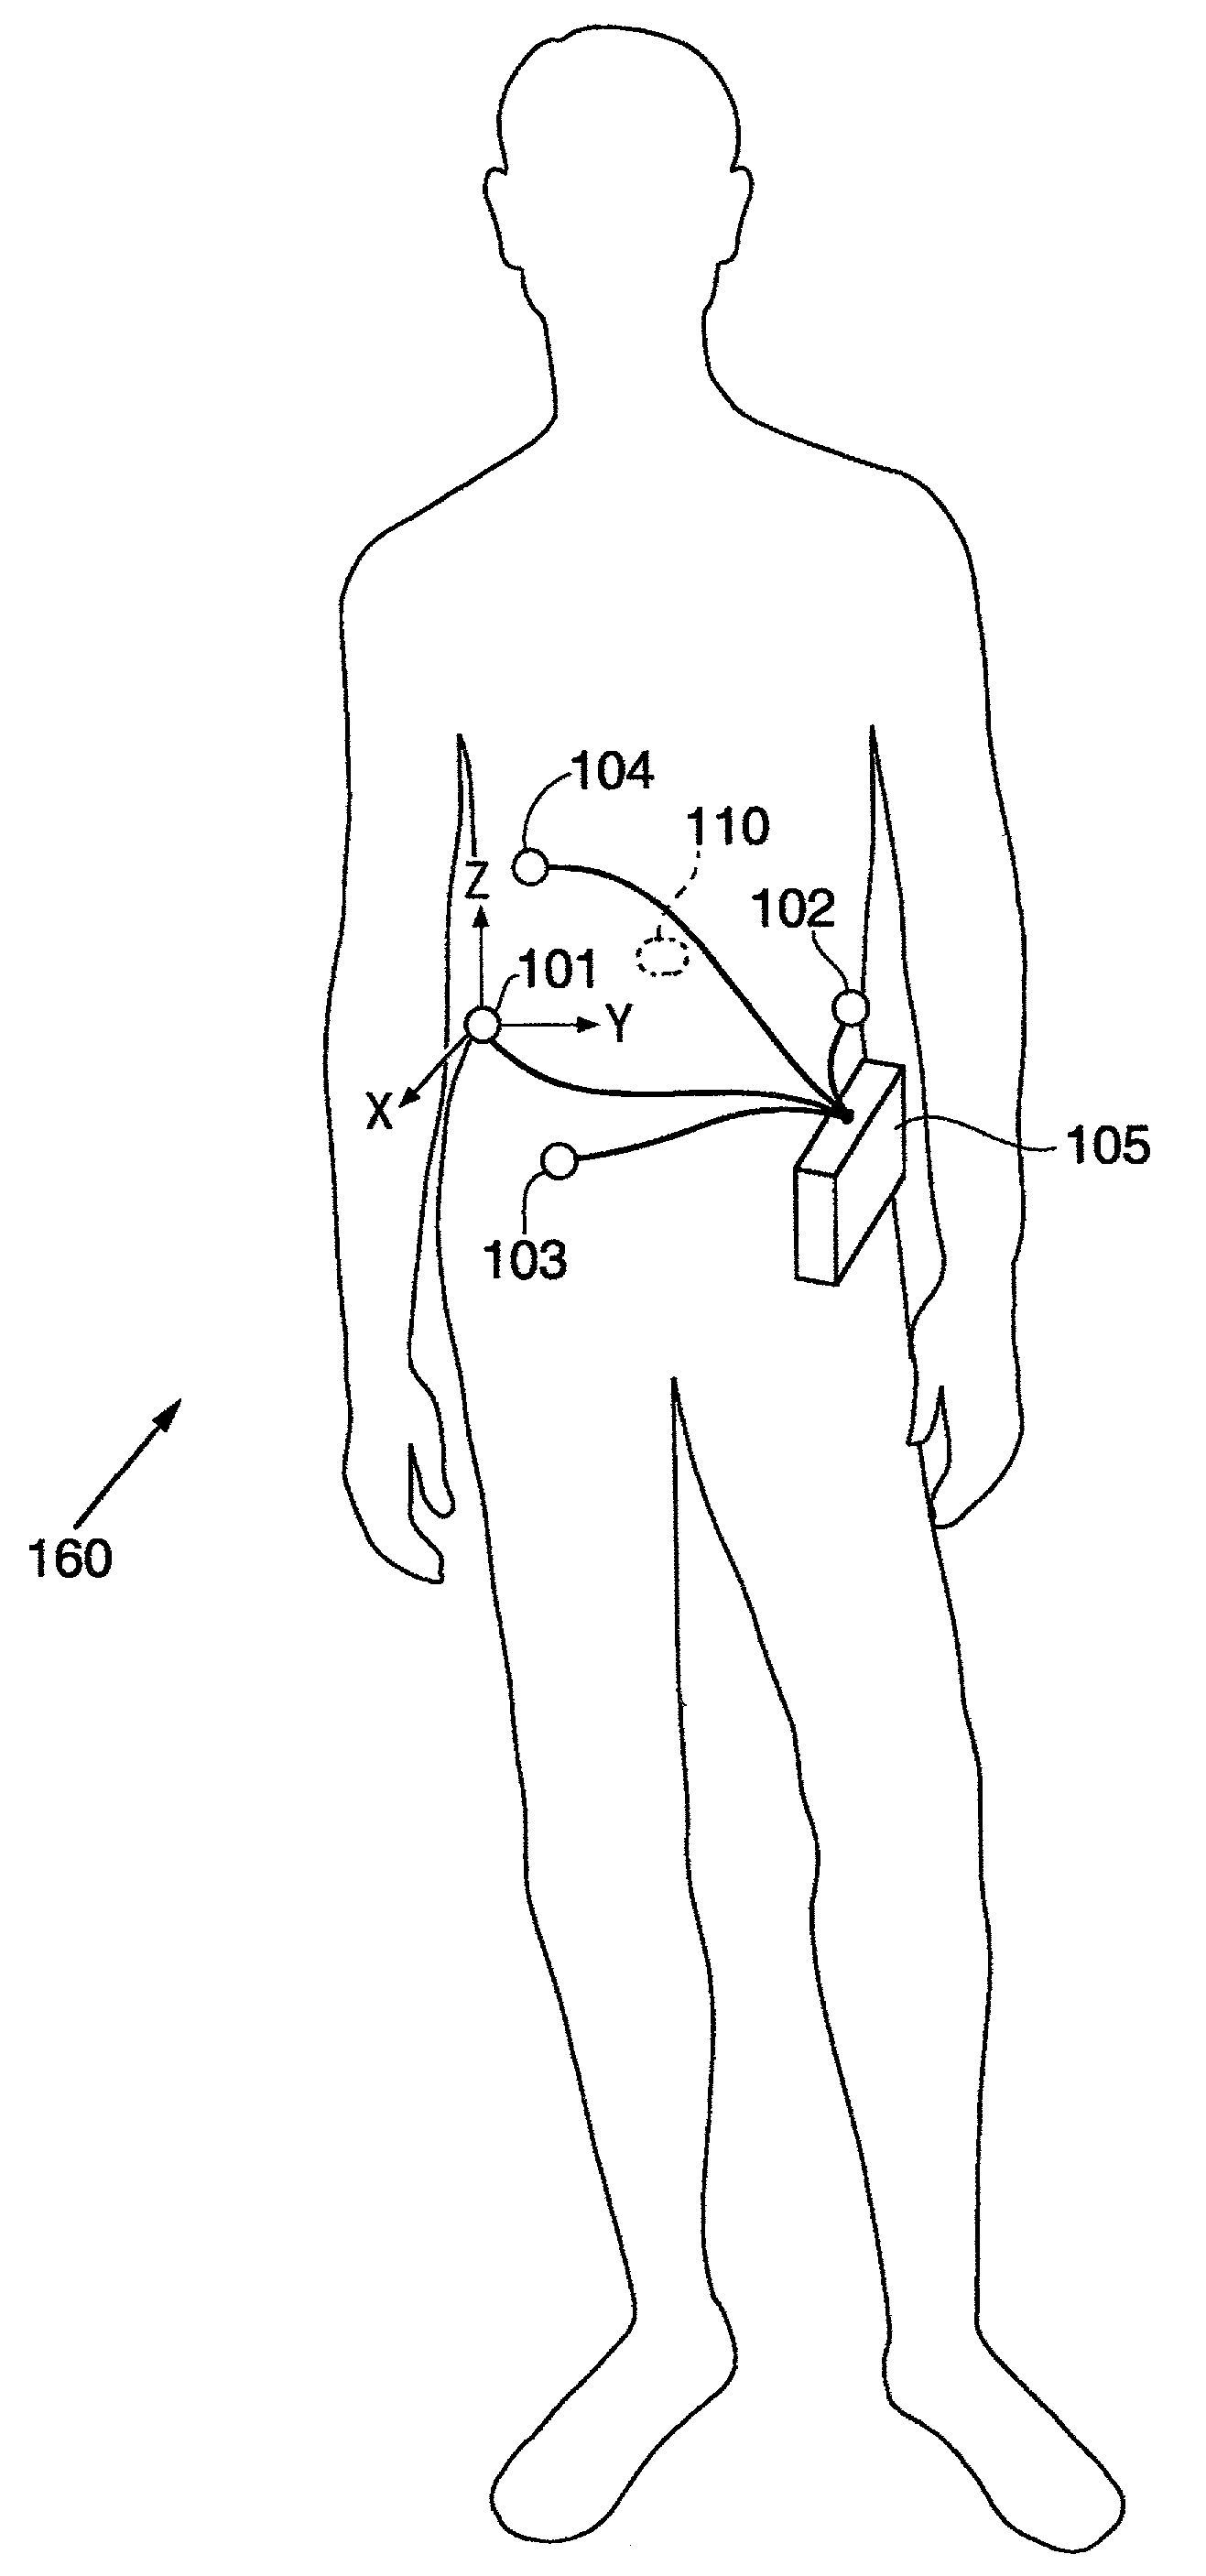 Capsule and method for treating or diagnosing the intestinal tract